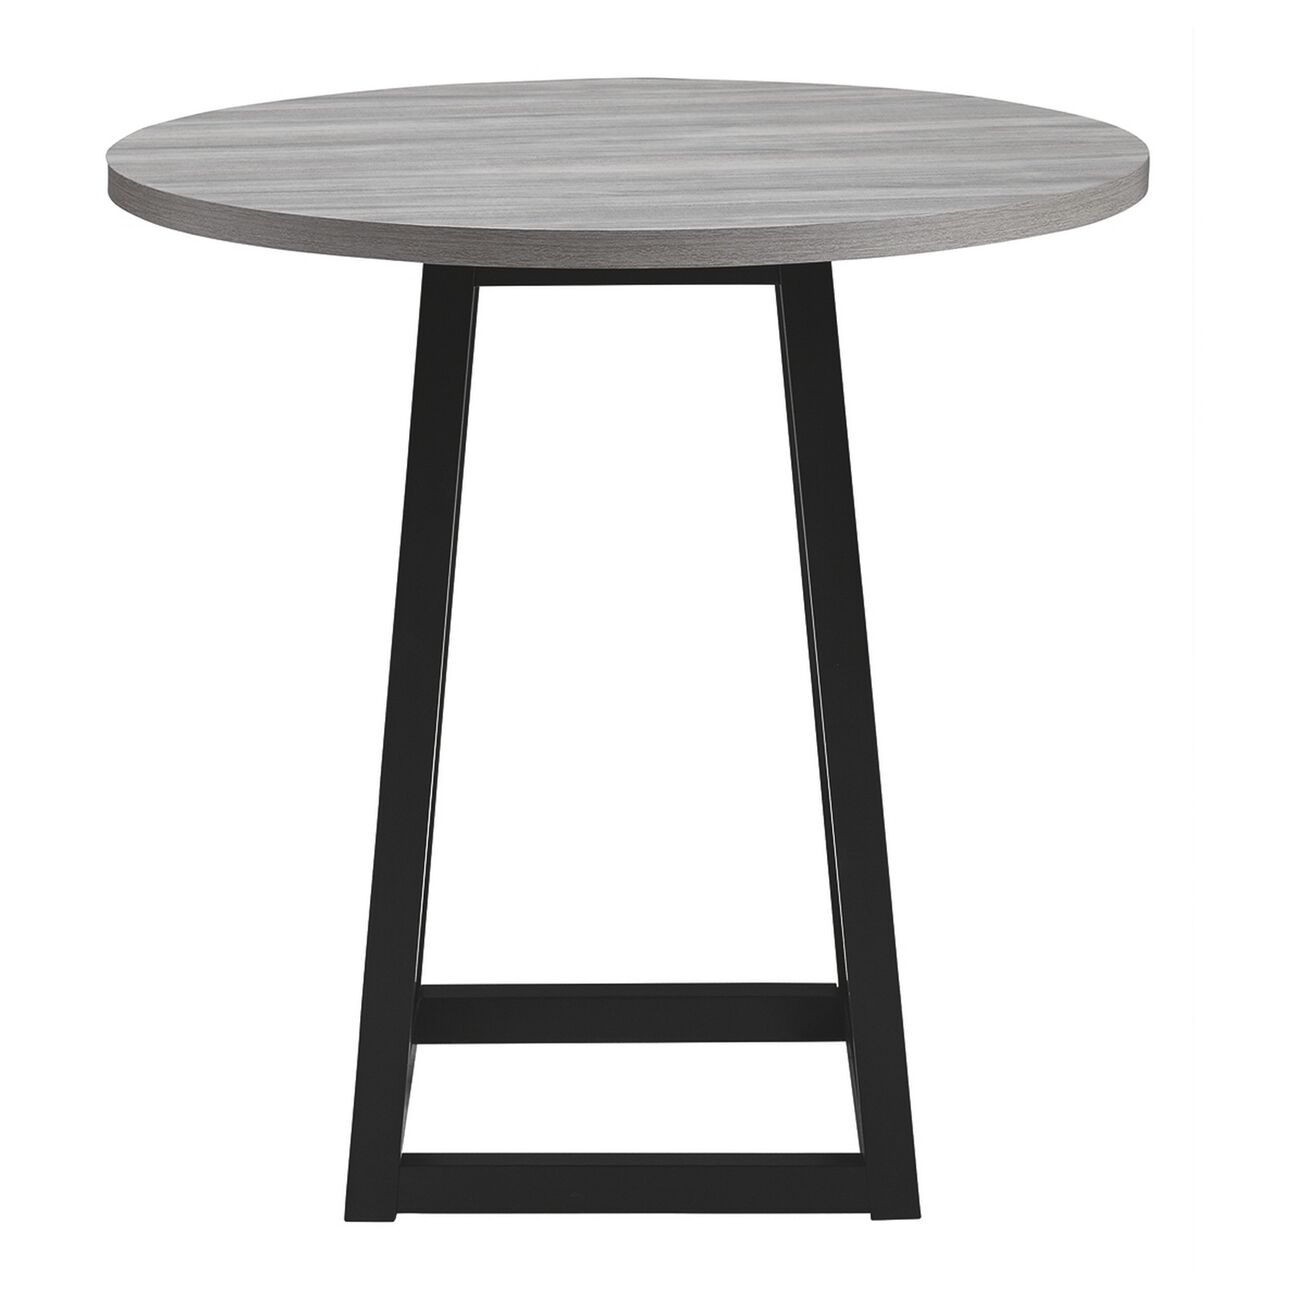 Round Wooden Counter Height Dining Table with Sled Base, Gray and Black